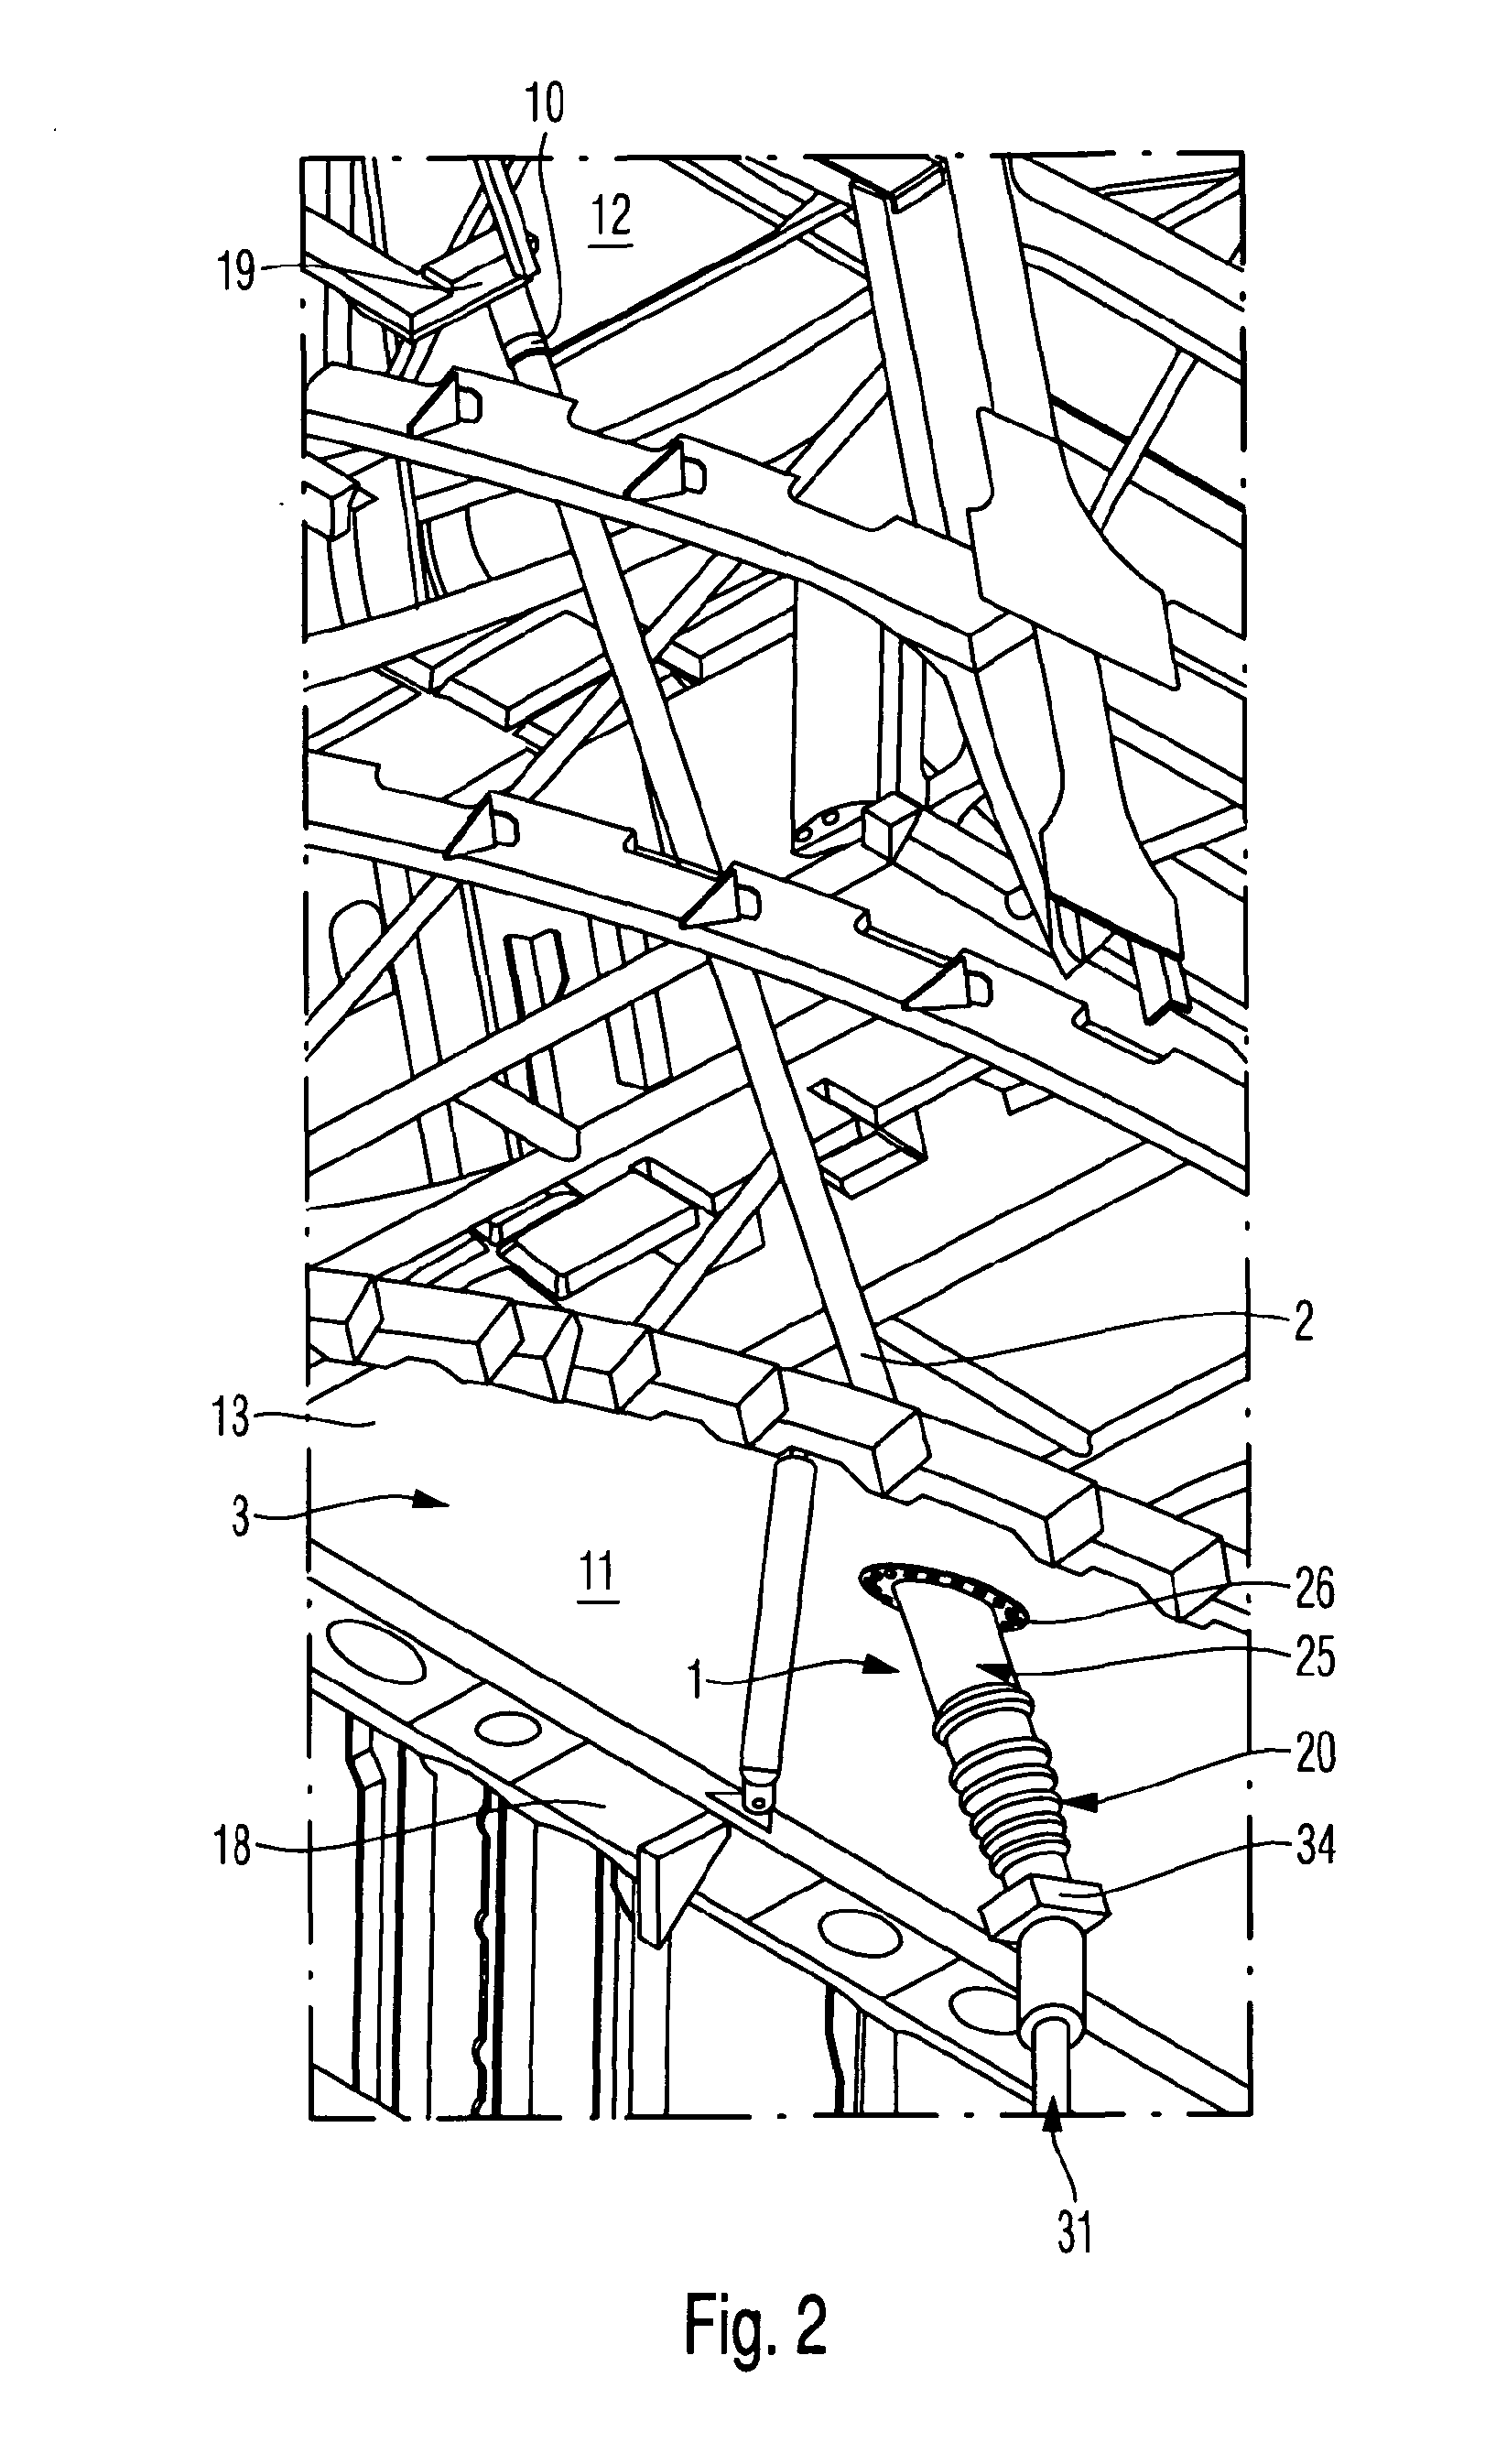 Arrangement for passing a line in a load-free manner through a pressure frame of a fuselage of an aircraft or spacecraft